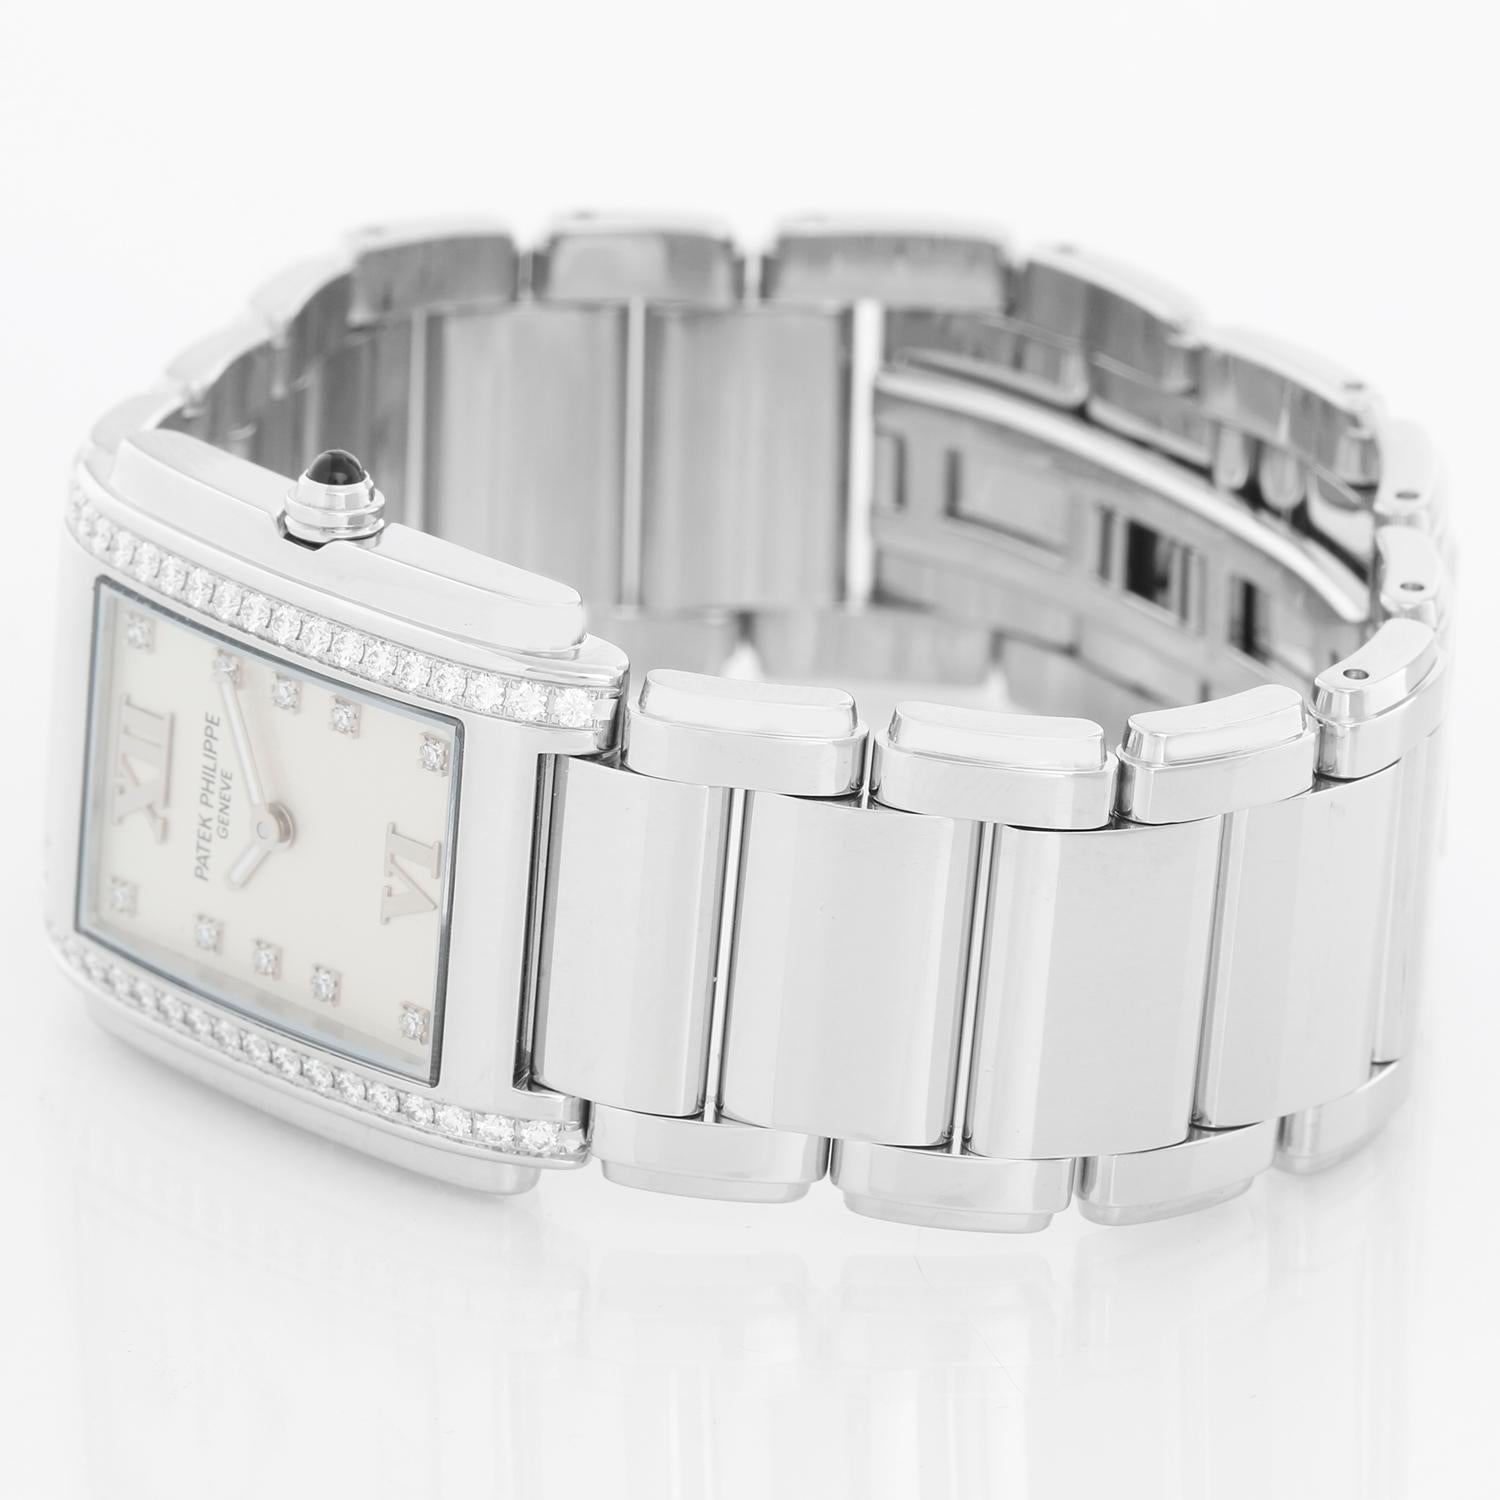 Ladies Patek Philippe Twenty-4 Watch Stainless Steel White Dial Watch 4910/10A - Quartz. Stainless steel case with diamond bezel (25mm x 30mm). White dial with diamond markers and Roman numerals at 12 & 6. Stainless steel Patek Philippe link